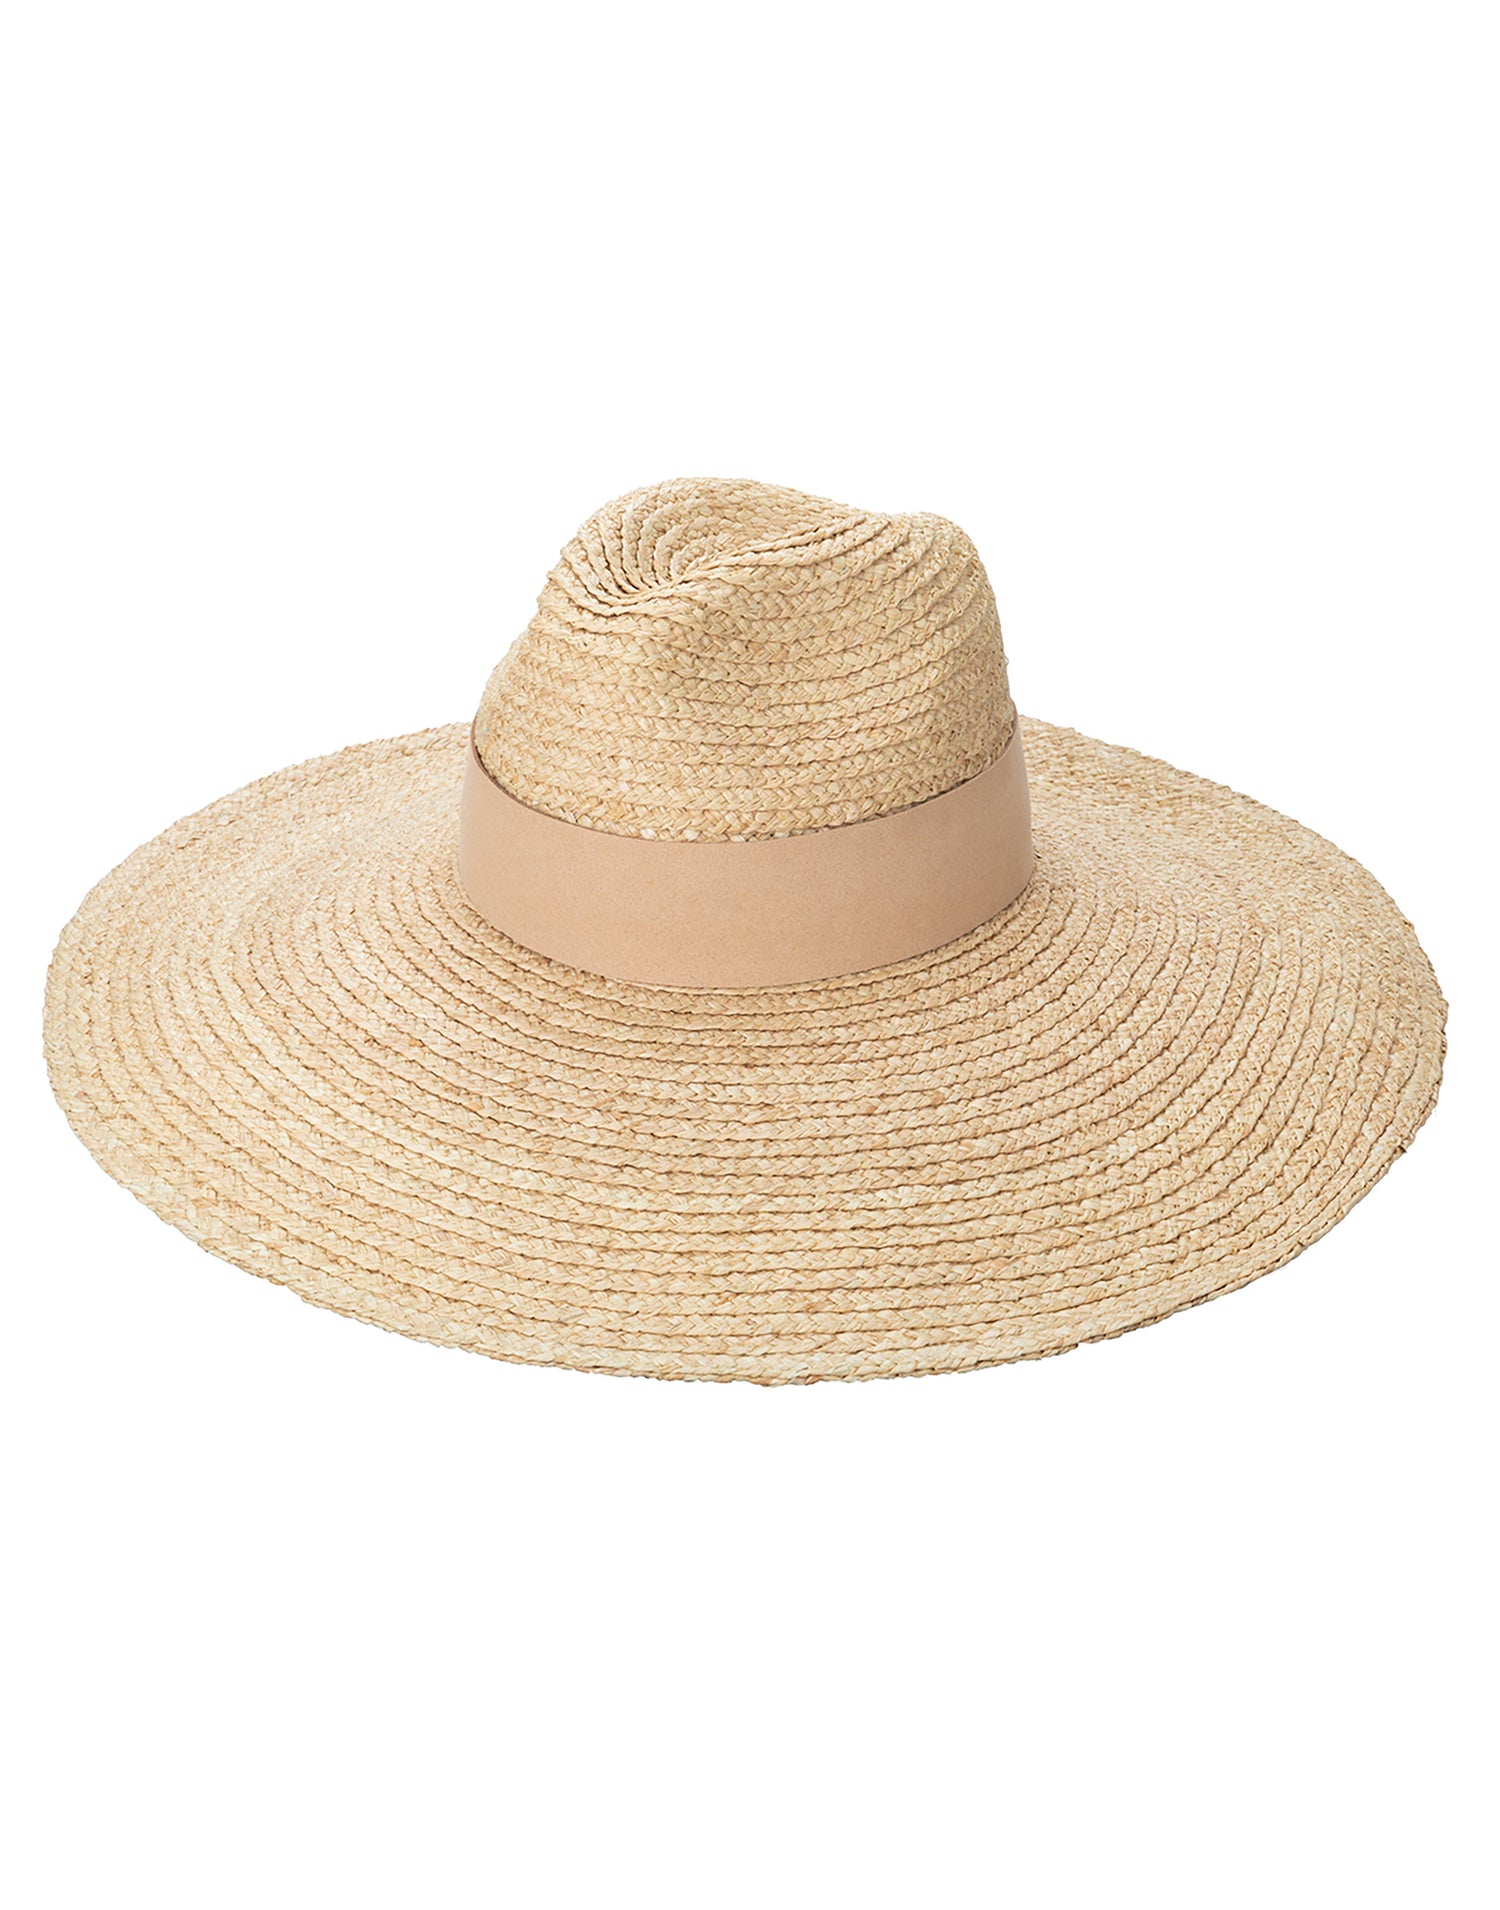 Raffia Braid Wide Brim Fedora with Suede Band in Natural by San Diego Hat Company - Product View